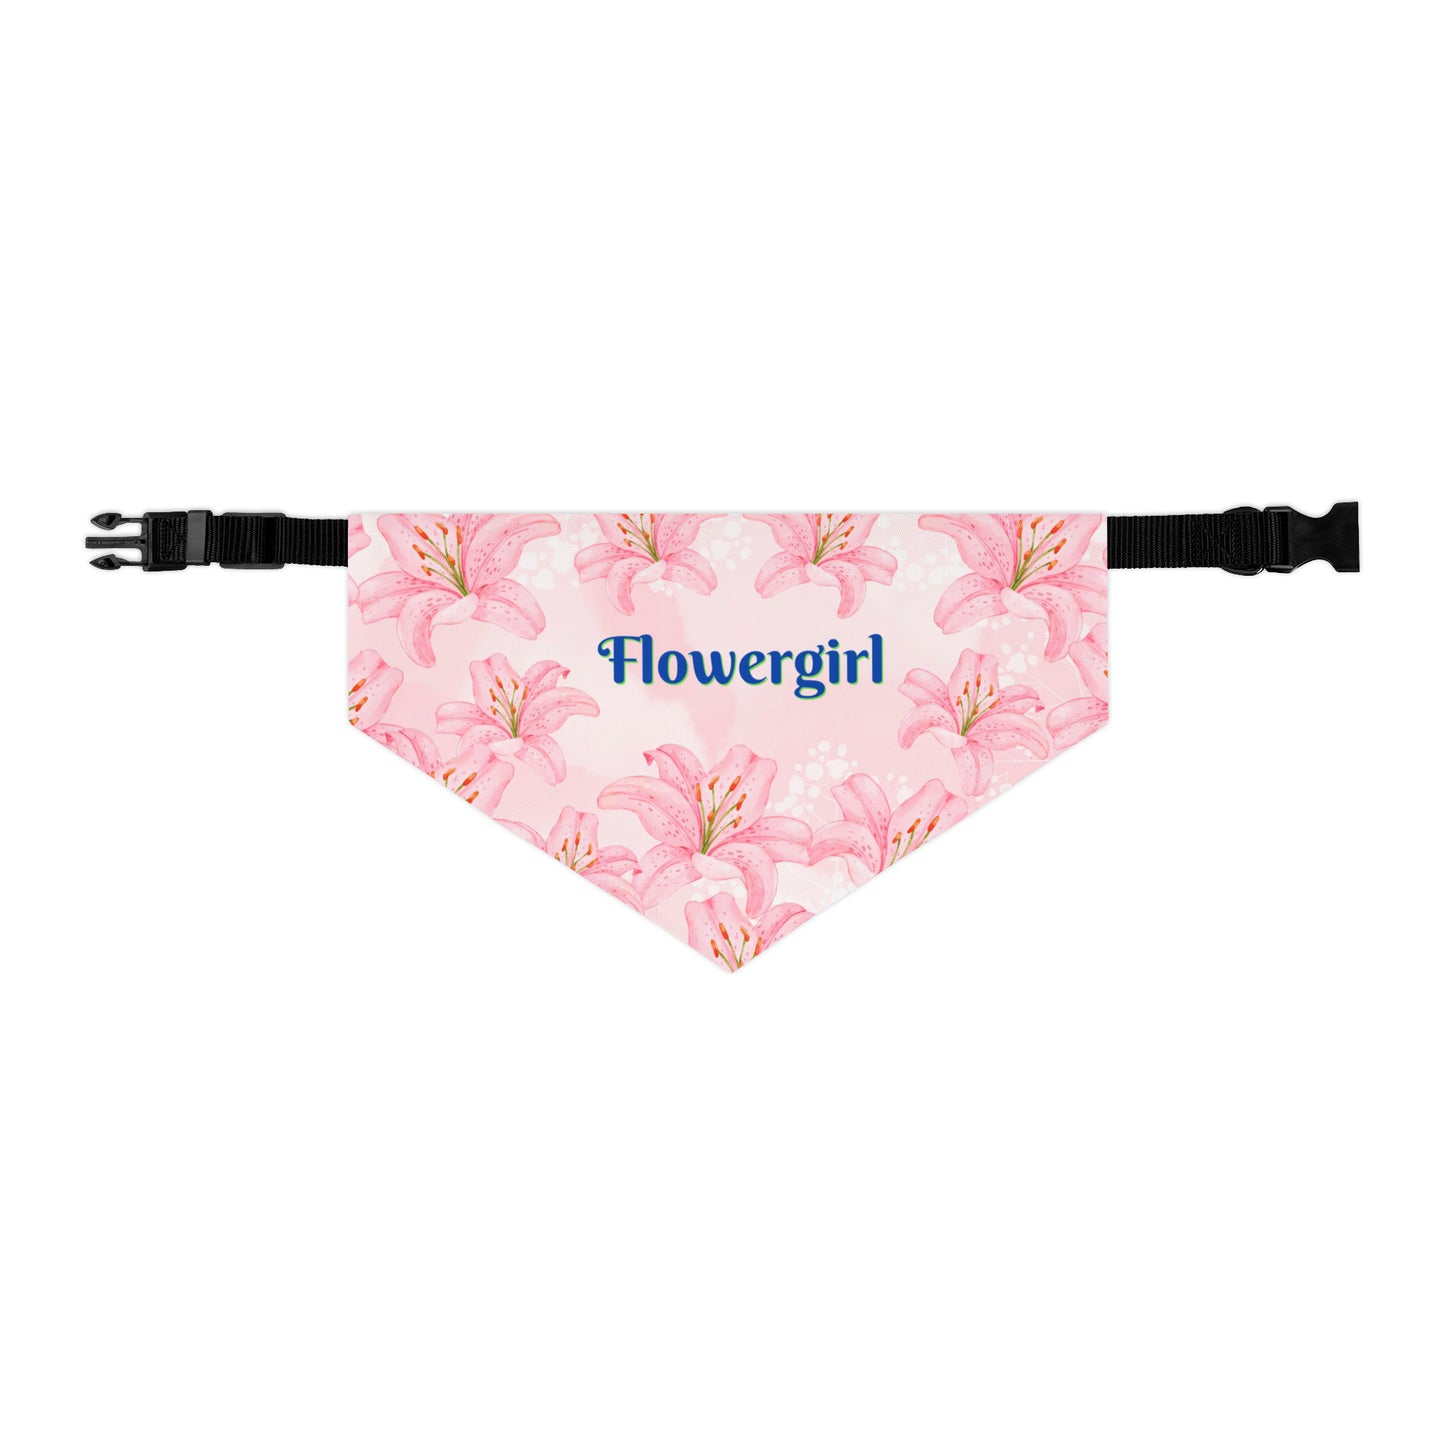 FurryFashionista Bridal Bandana COLLAR with Easy-On & Off Buckle - Pink "FLOWERGIRL" Style - Pink Hibiscus Motif